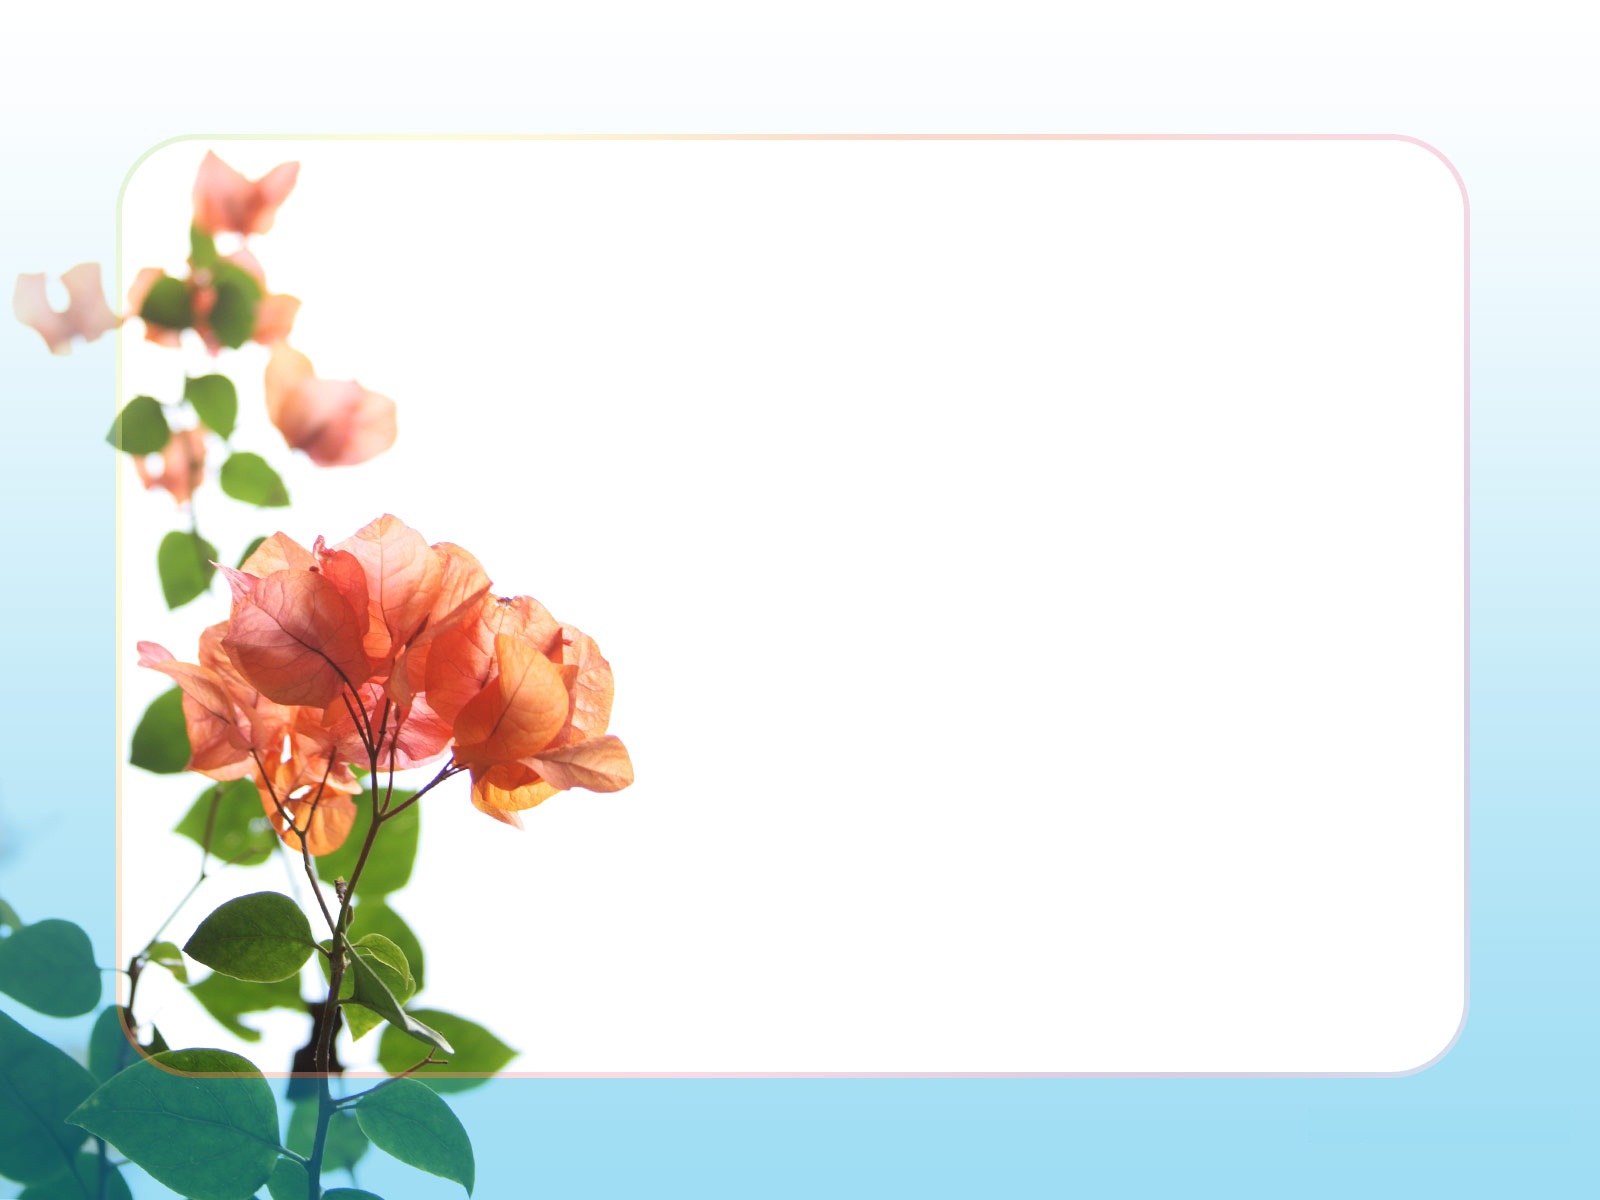 Flower Borders Free - Cliparts.co